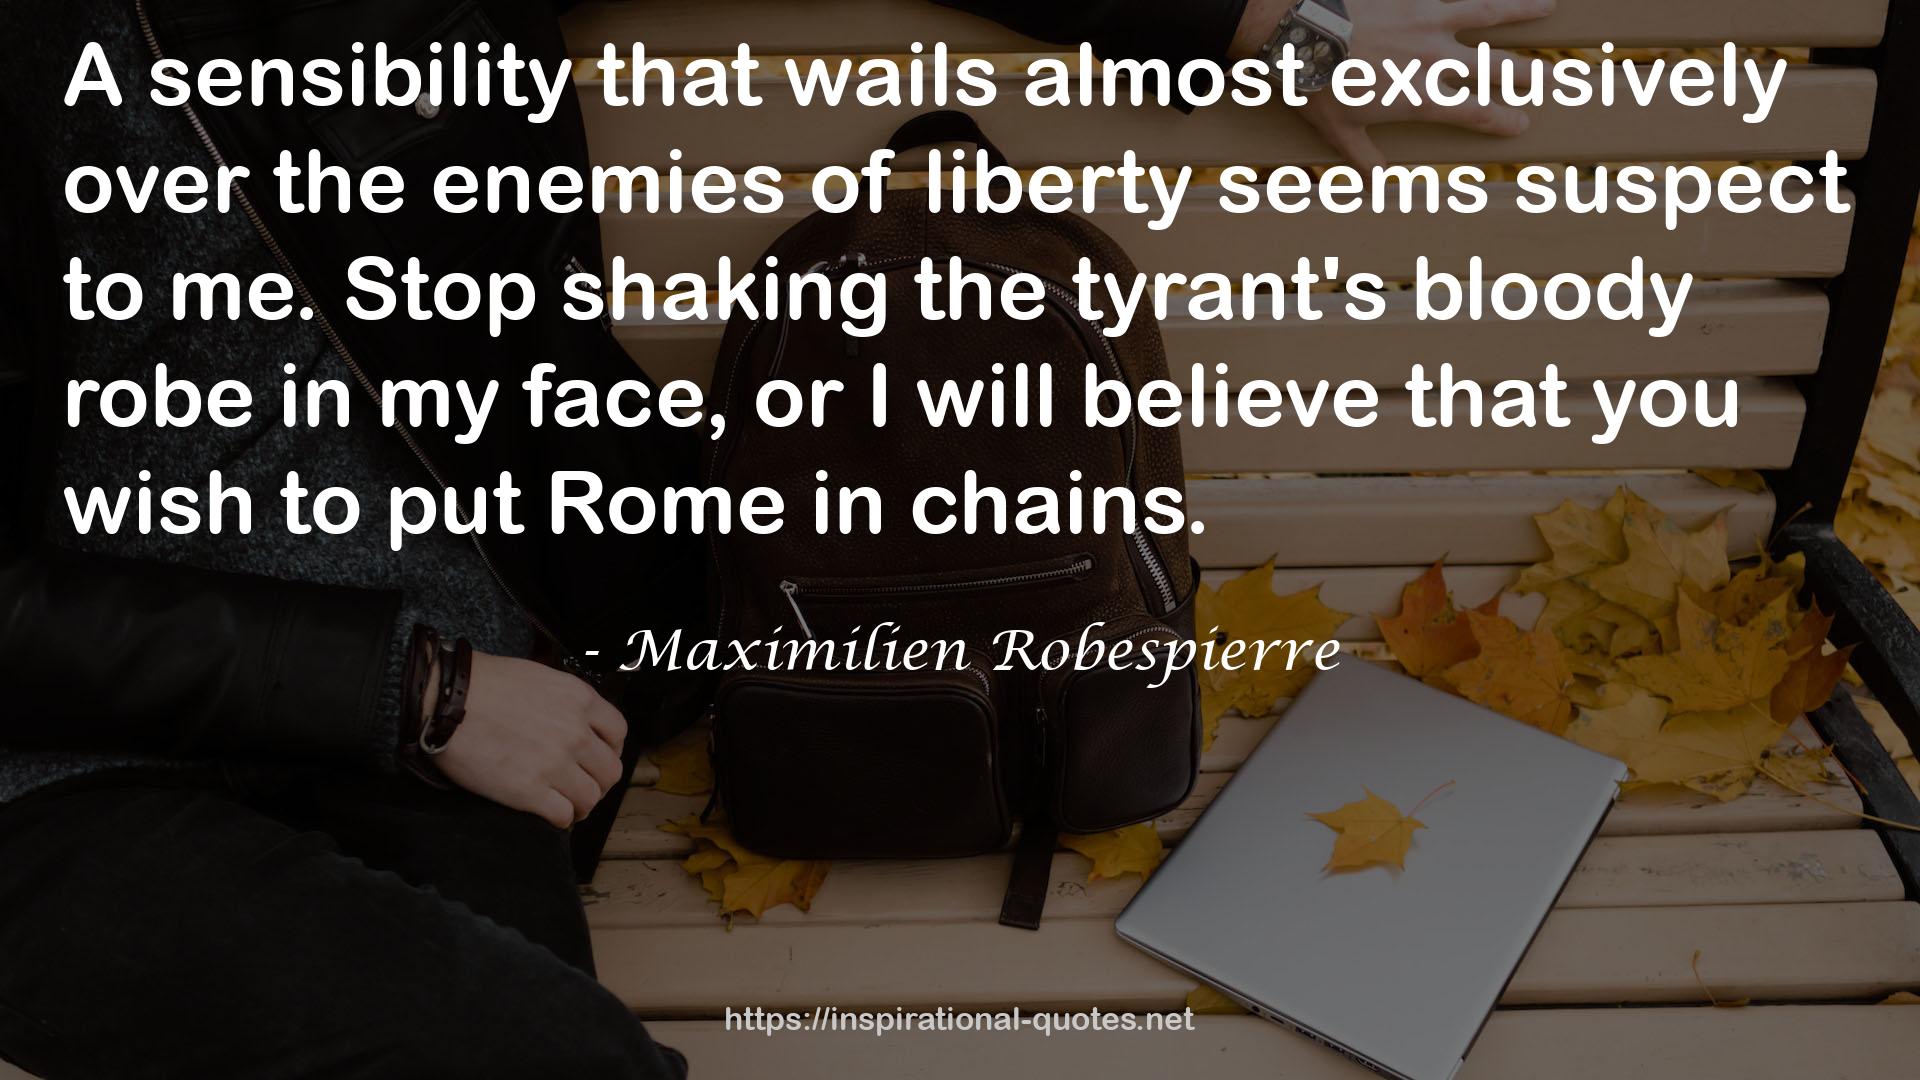 Maximilien Robespierre QUOTES